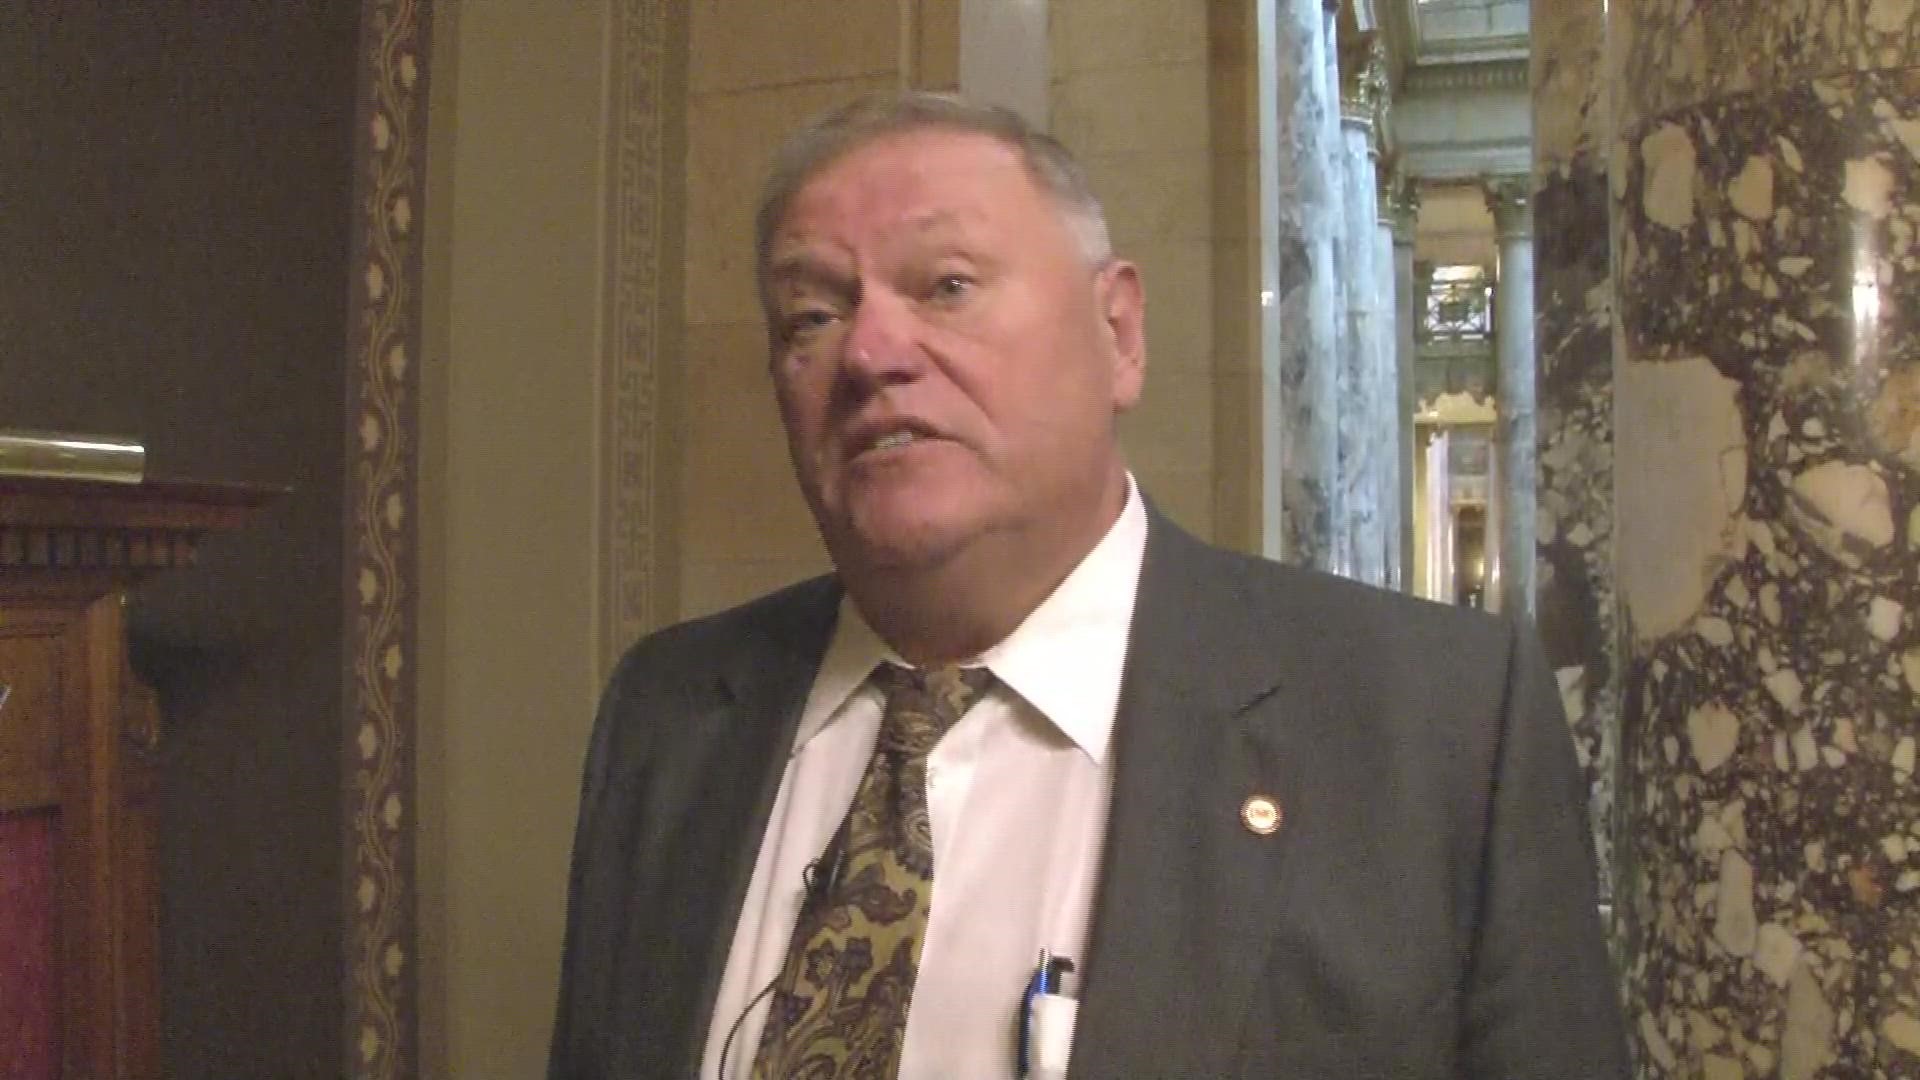 Sen. Tom Bakk won't seek re-election after 28 years representing Minnesota's Arrowhead region at the State Capitol. He's part of parade of retiring state lawmakers.